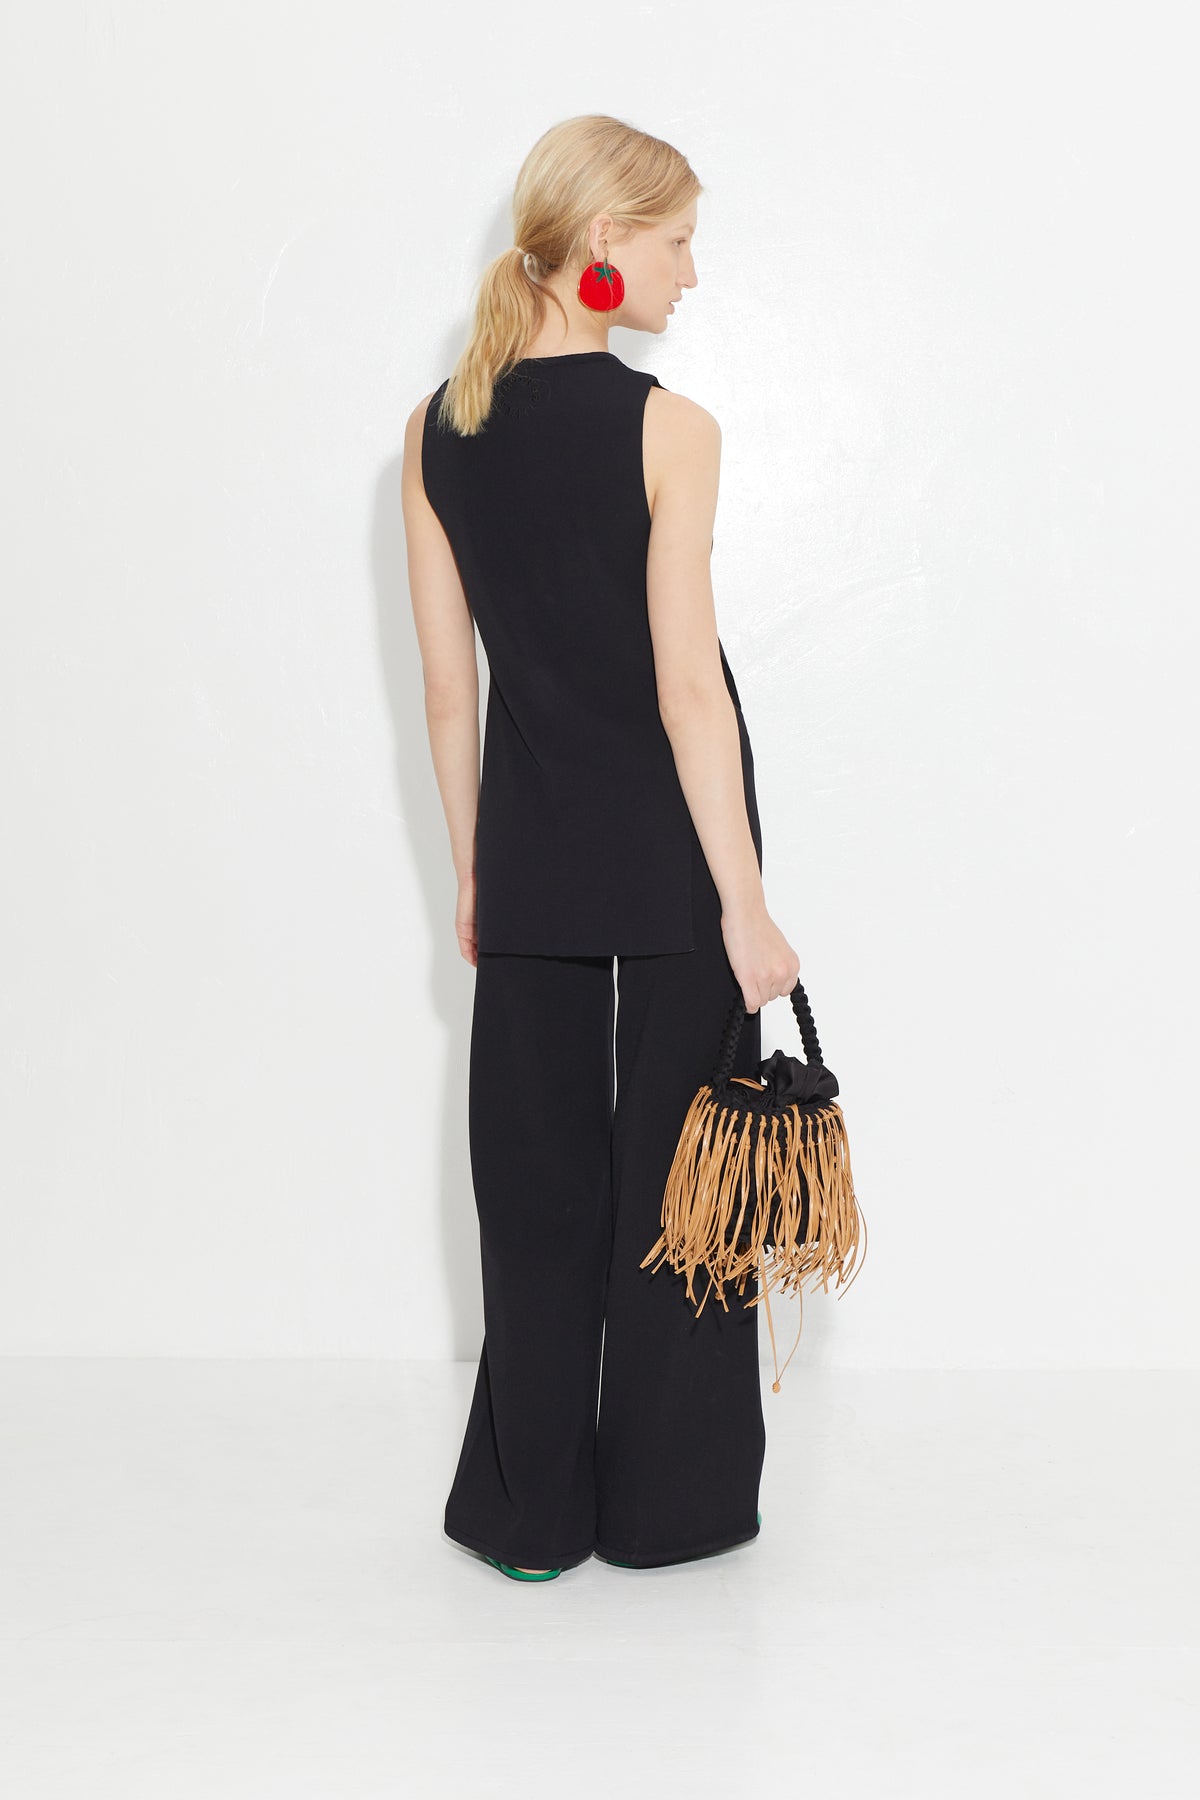 Knits By Canoga Top in Black